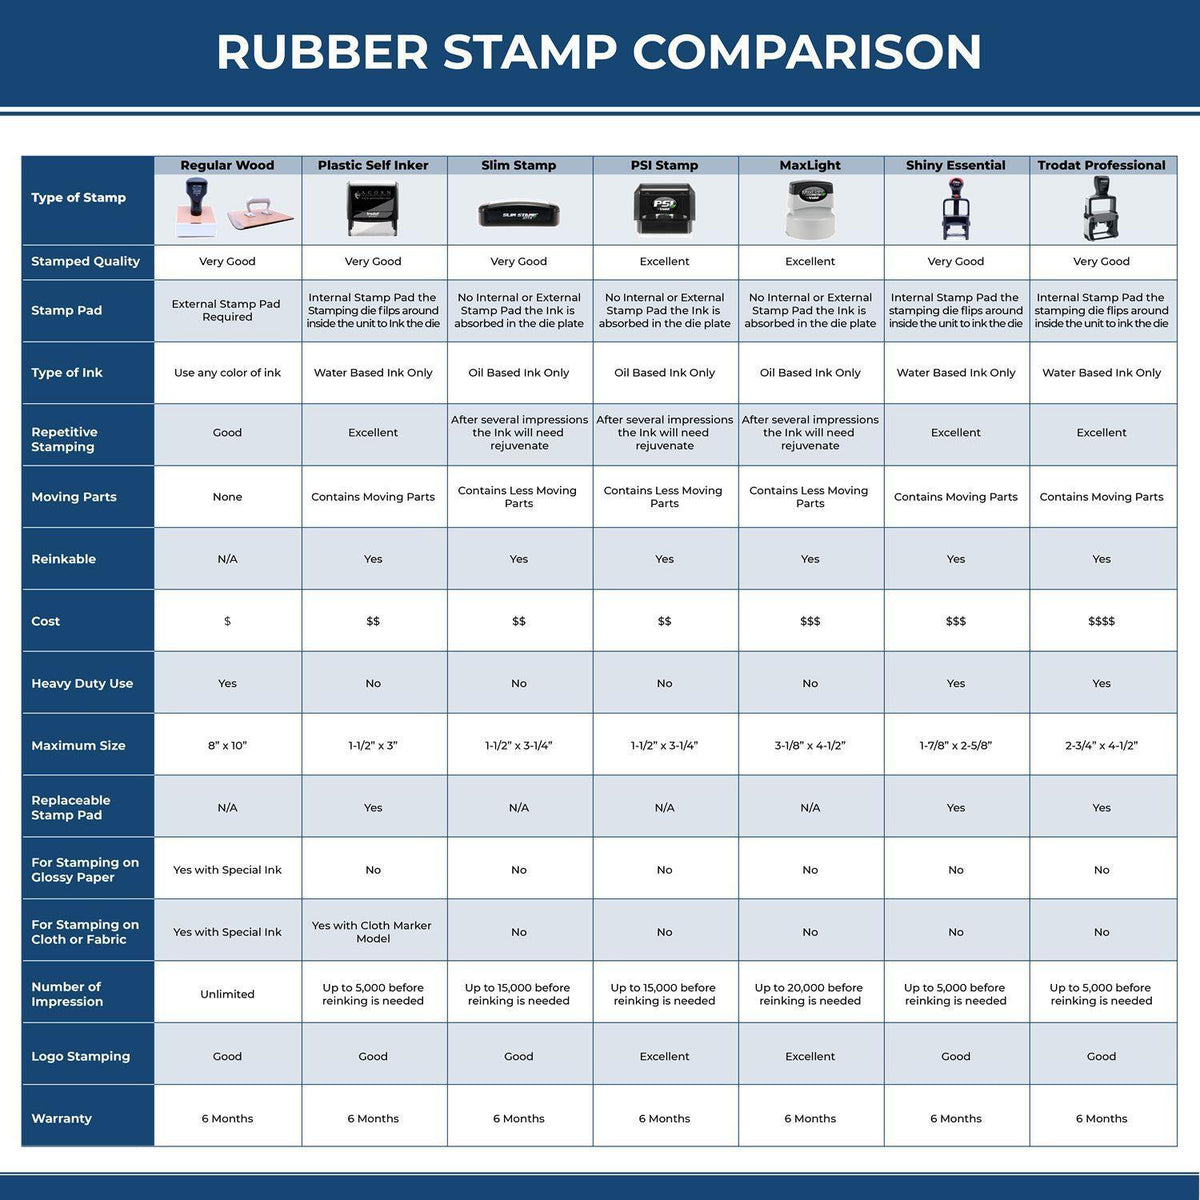 Large Pre Inked Workers Comp Stamp 4527SLIM Rubber Stamp Comparison